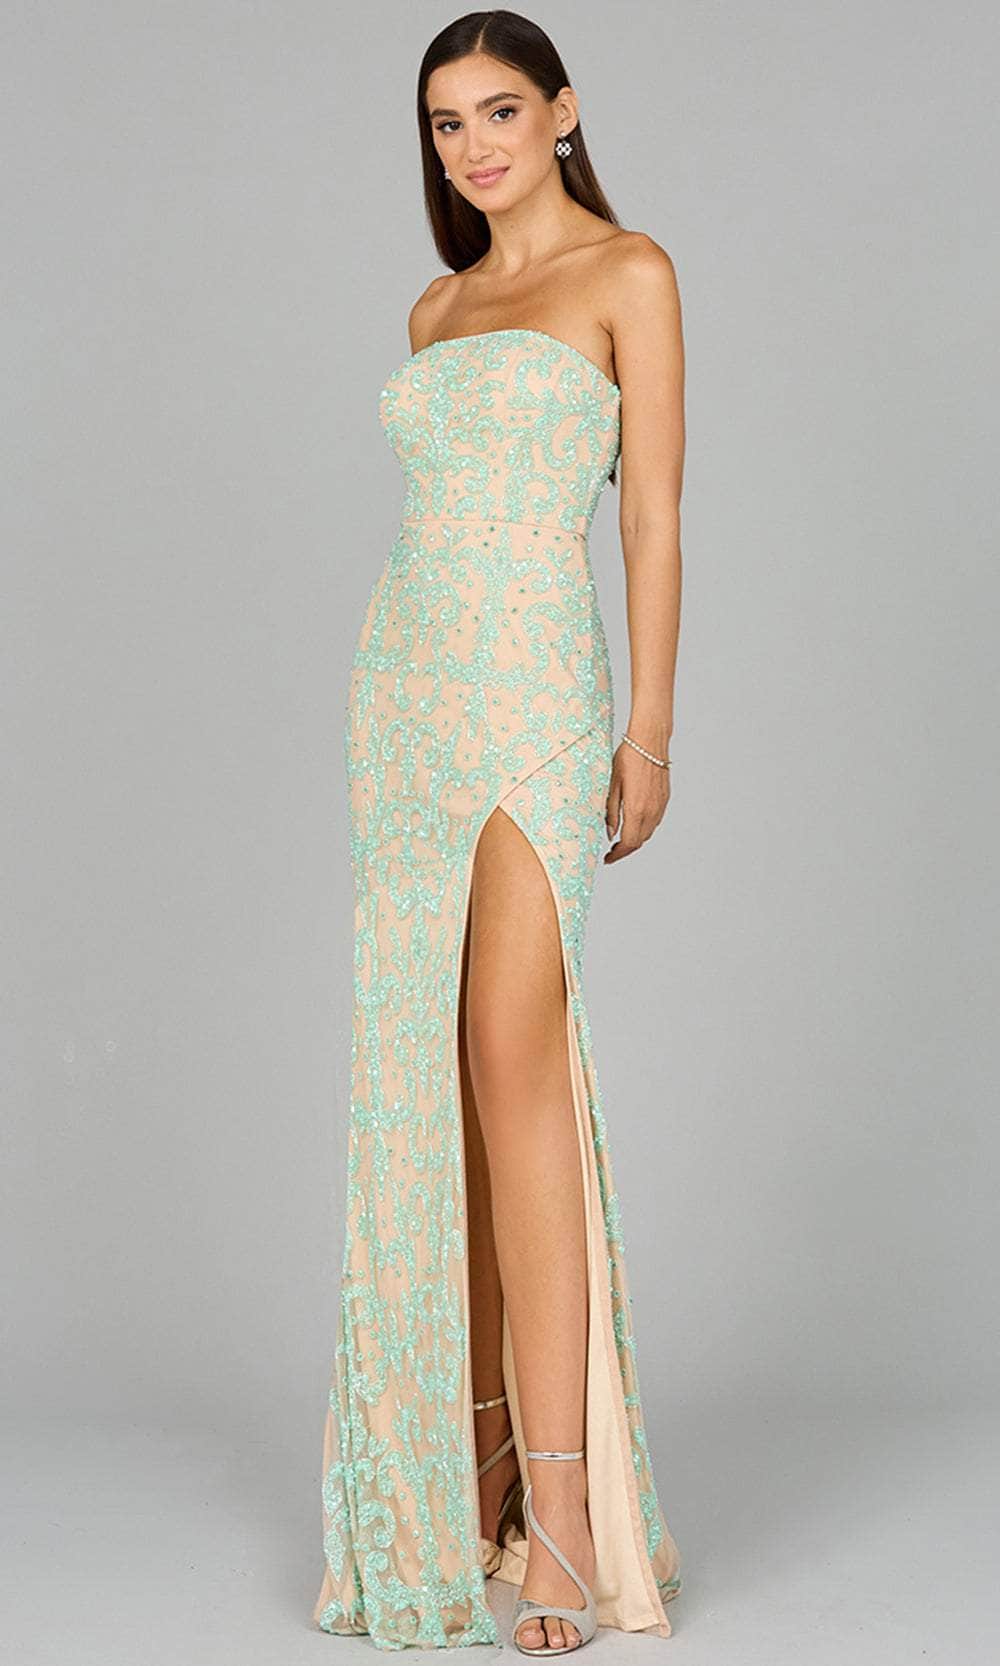 Lara Dresses 9952 - Strapless Beaded Evening Dress Special Occasion Dresses 0/ Nude/Mint